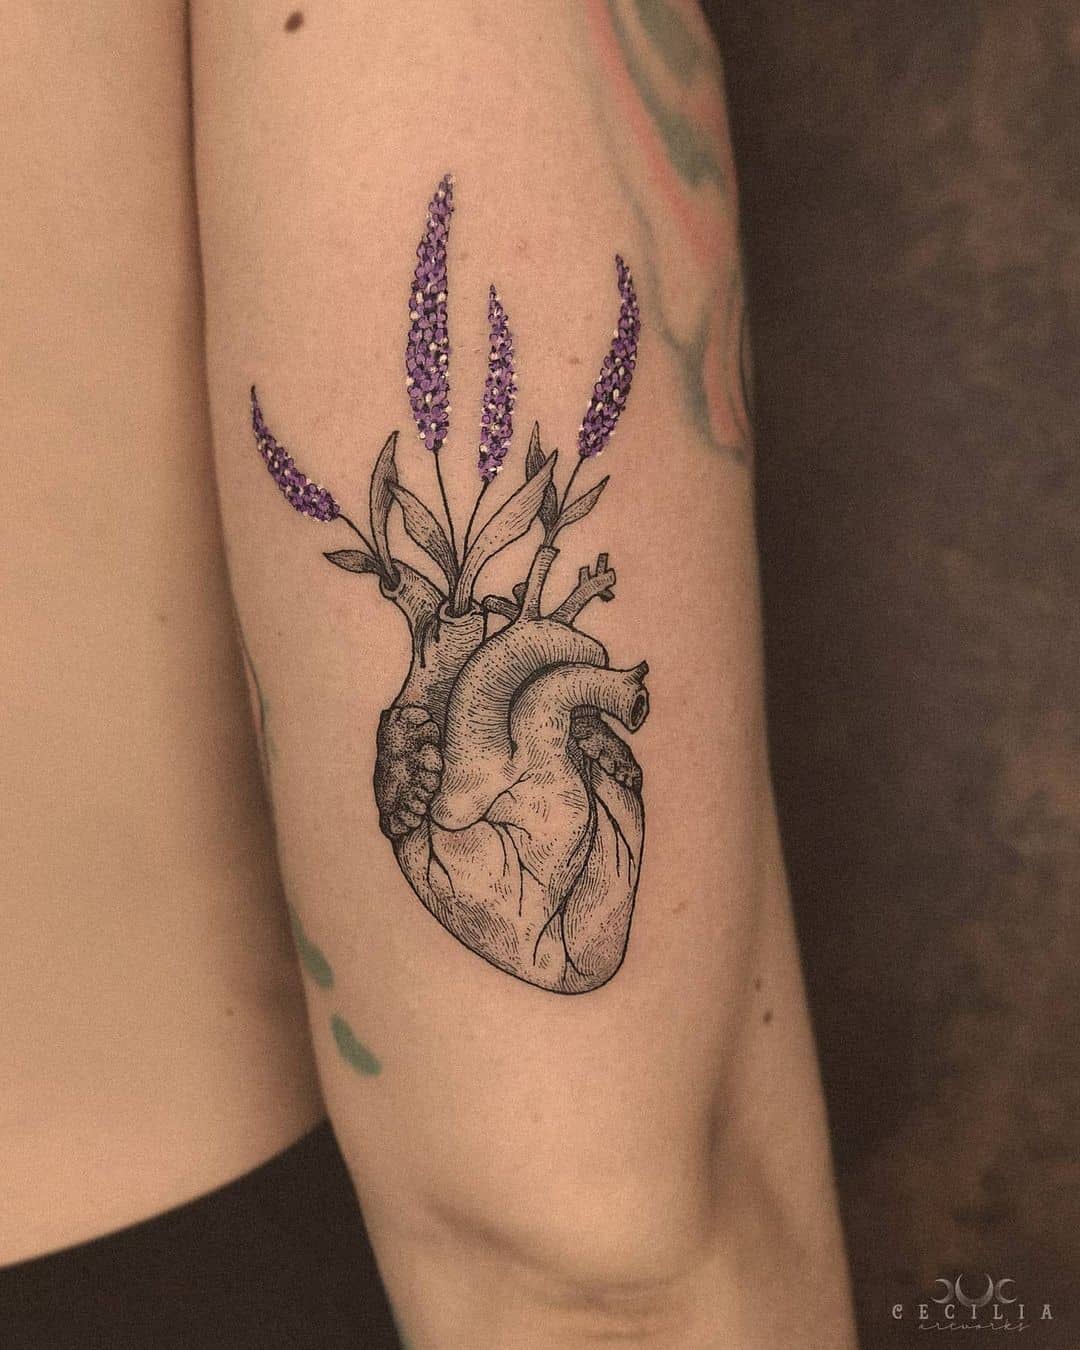 Lavender in the heart